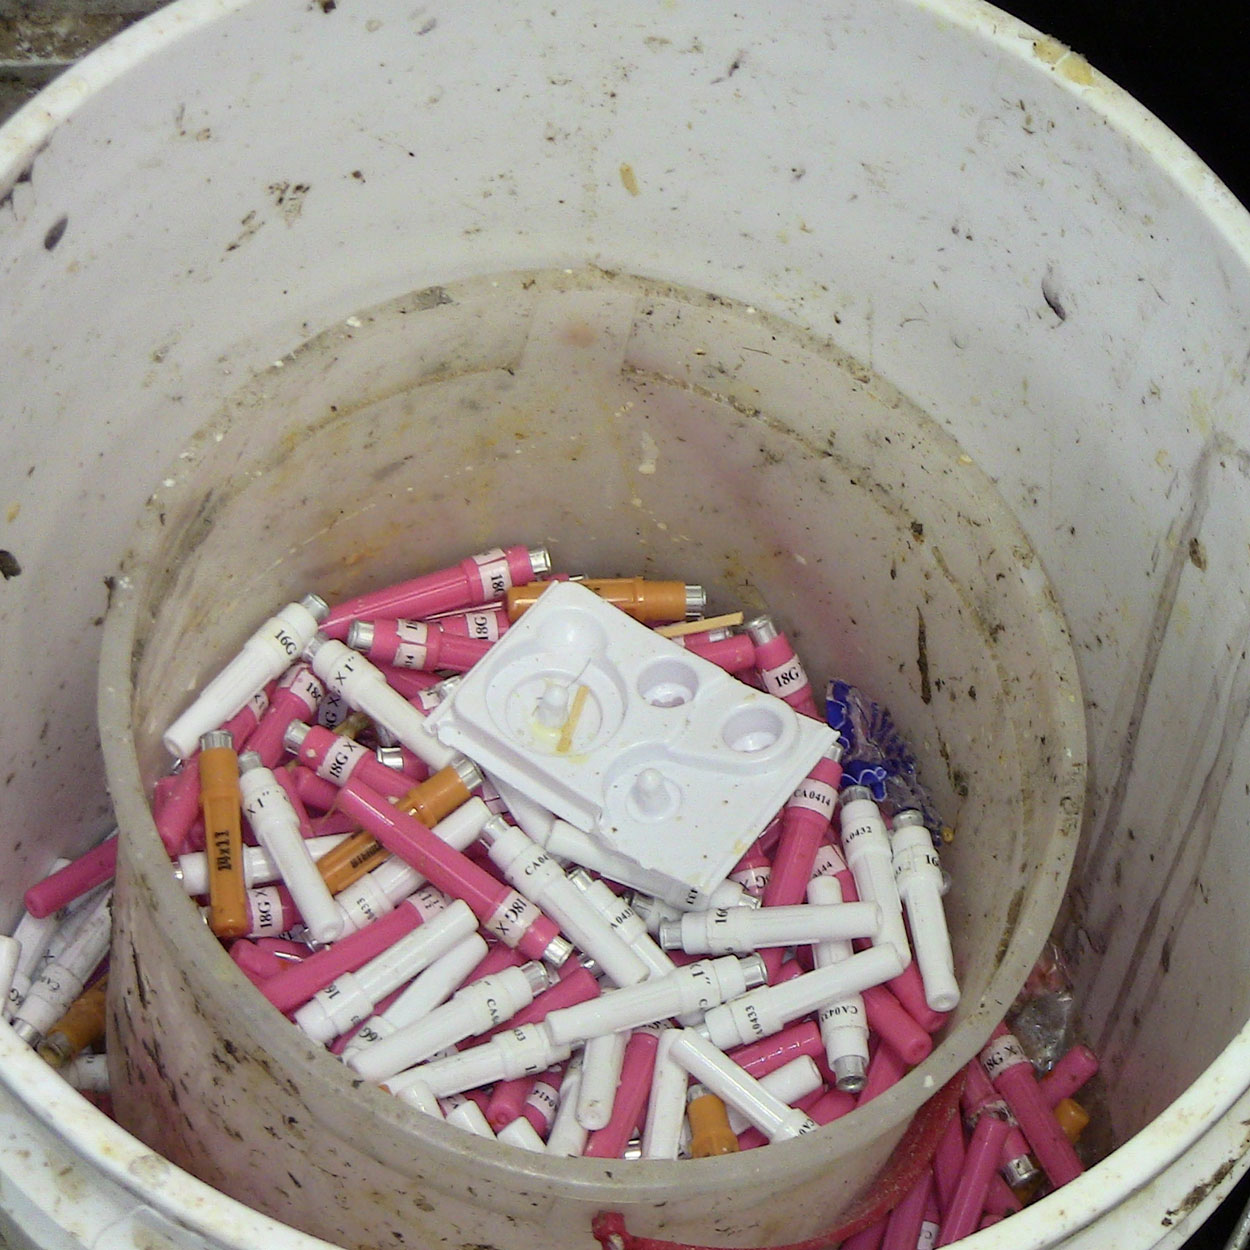 Unsafe sharps disposal container with several syringes and no lid.